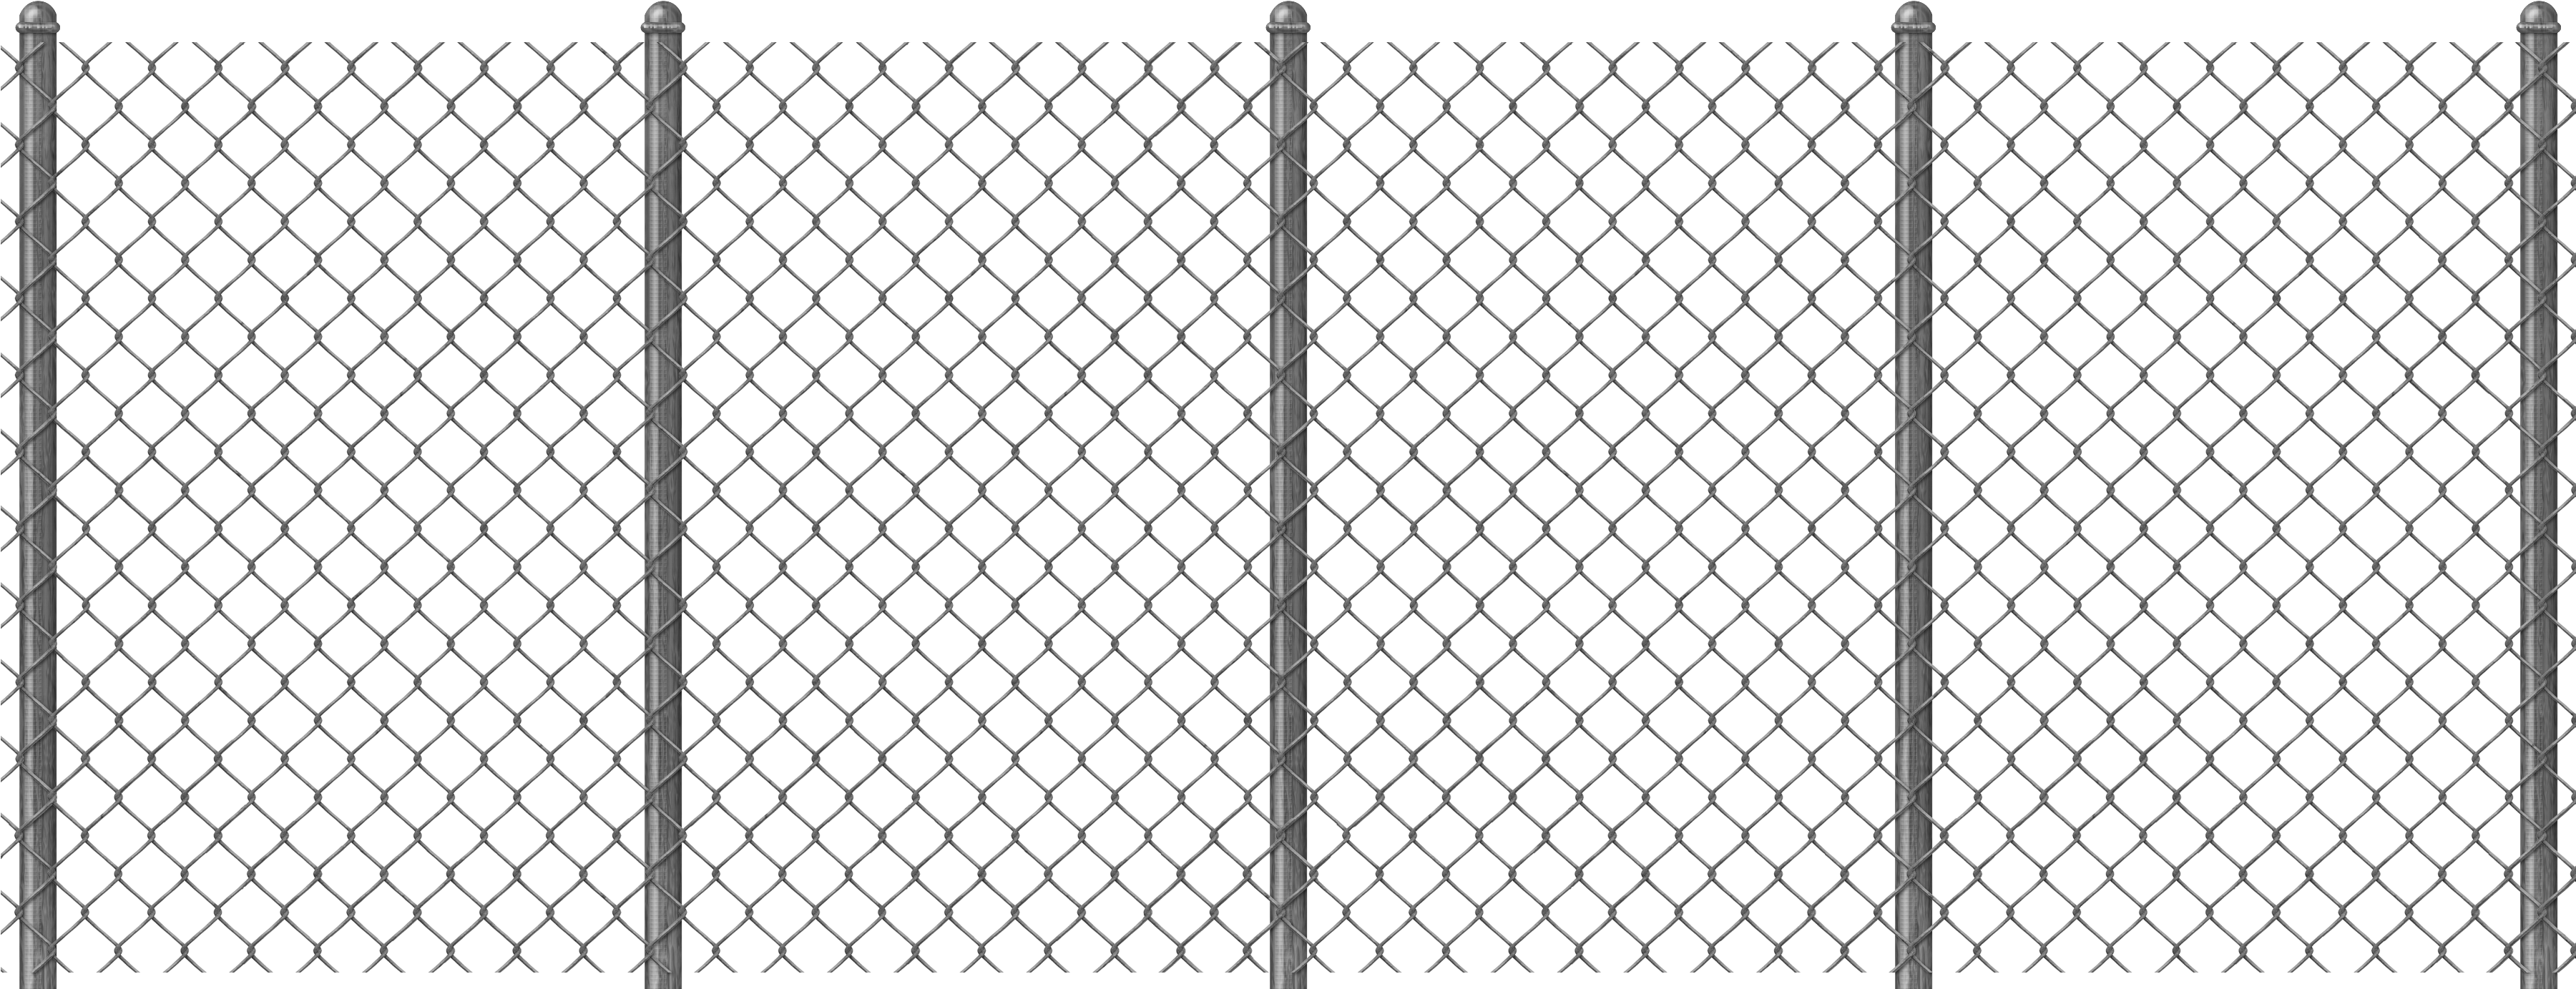 A Close Up Of A Chain Link Fence